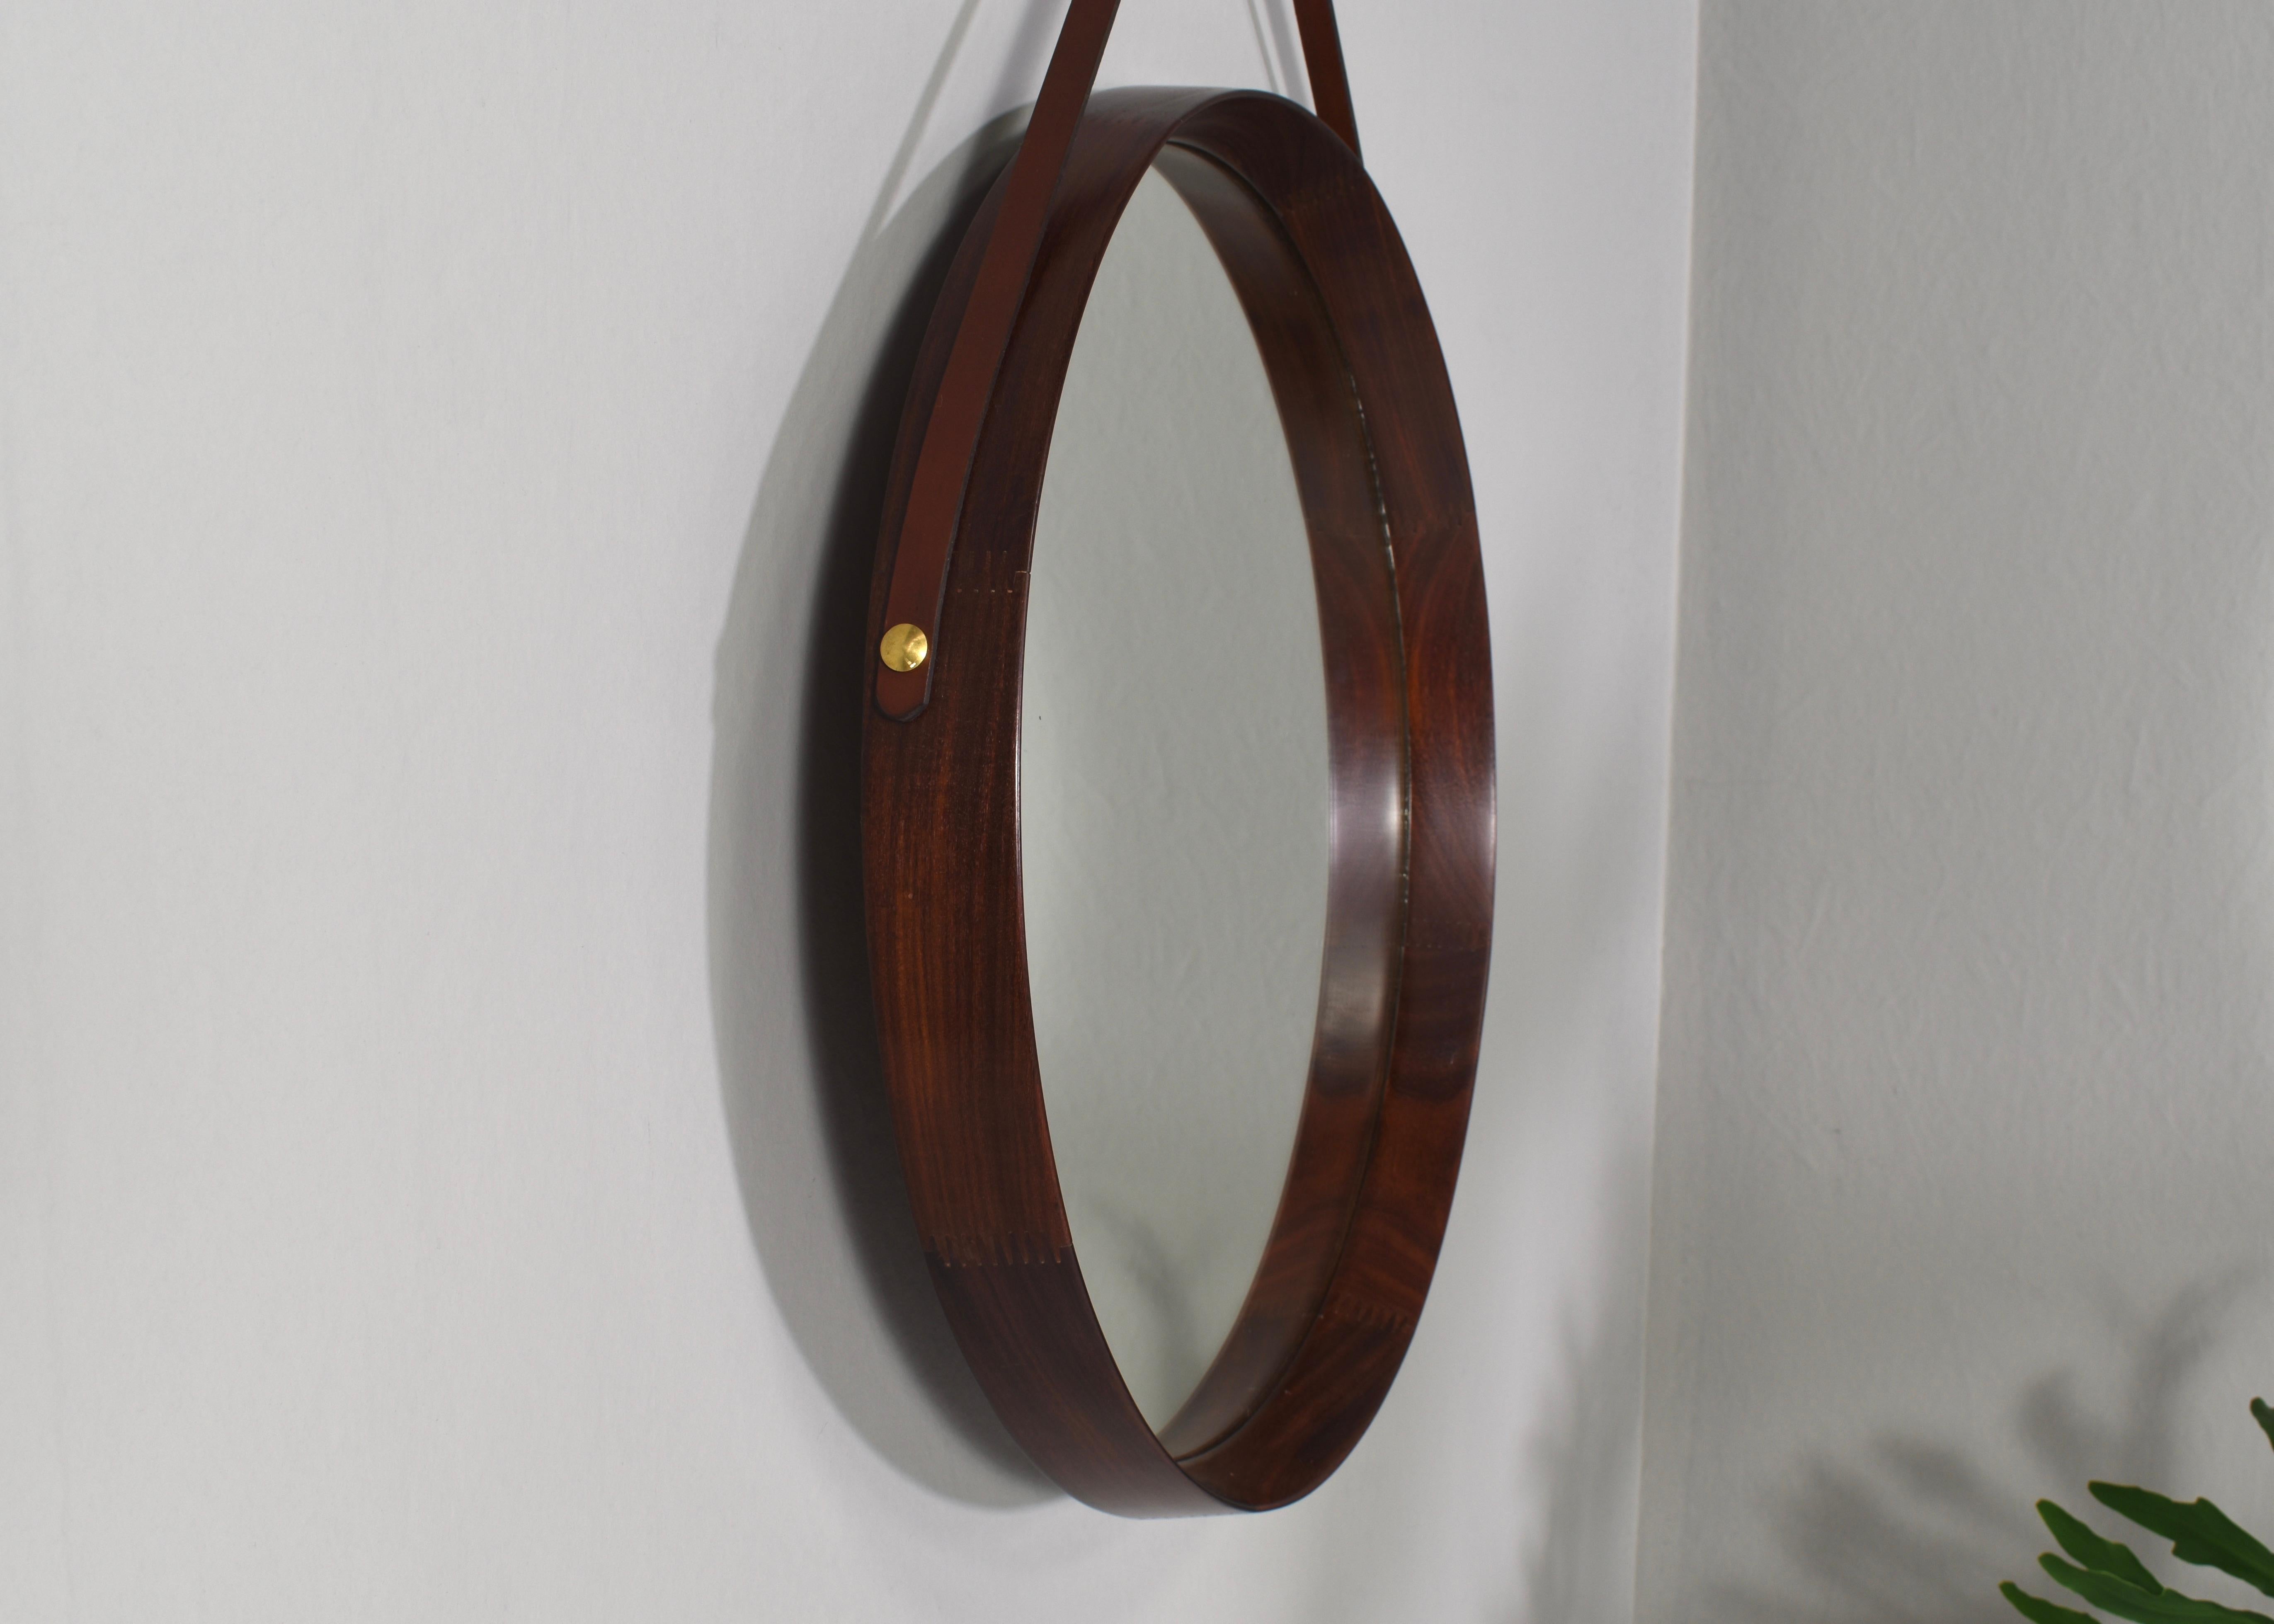 Round Italian Wall Mirror in Solid Teak, Leather and Brass, 1950s For Sale 1